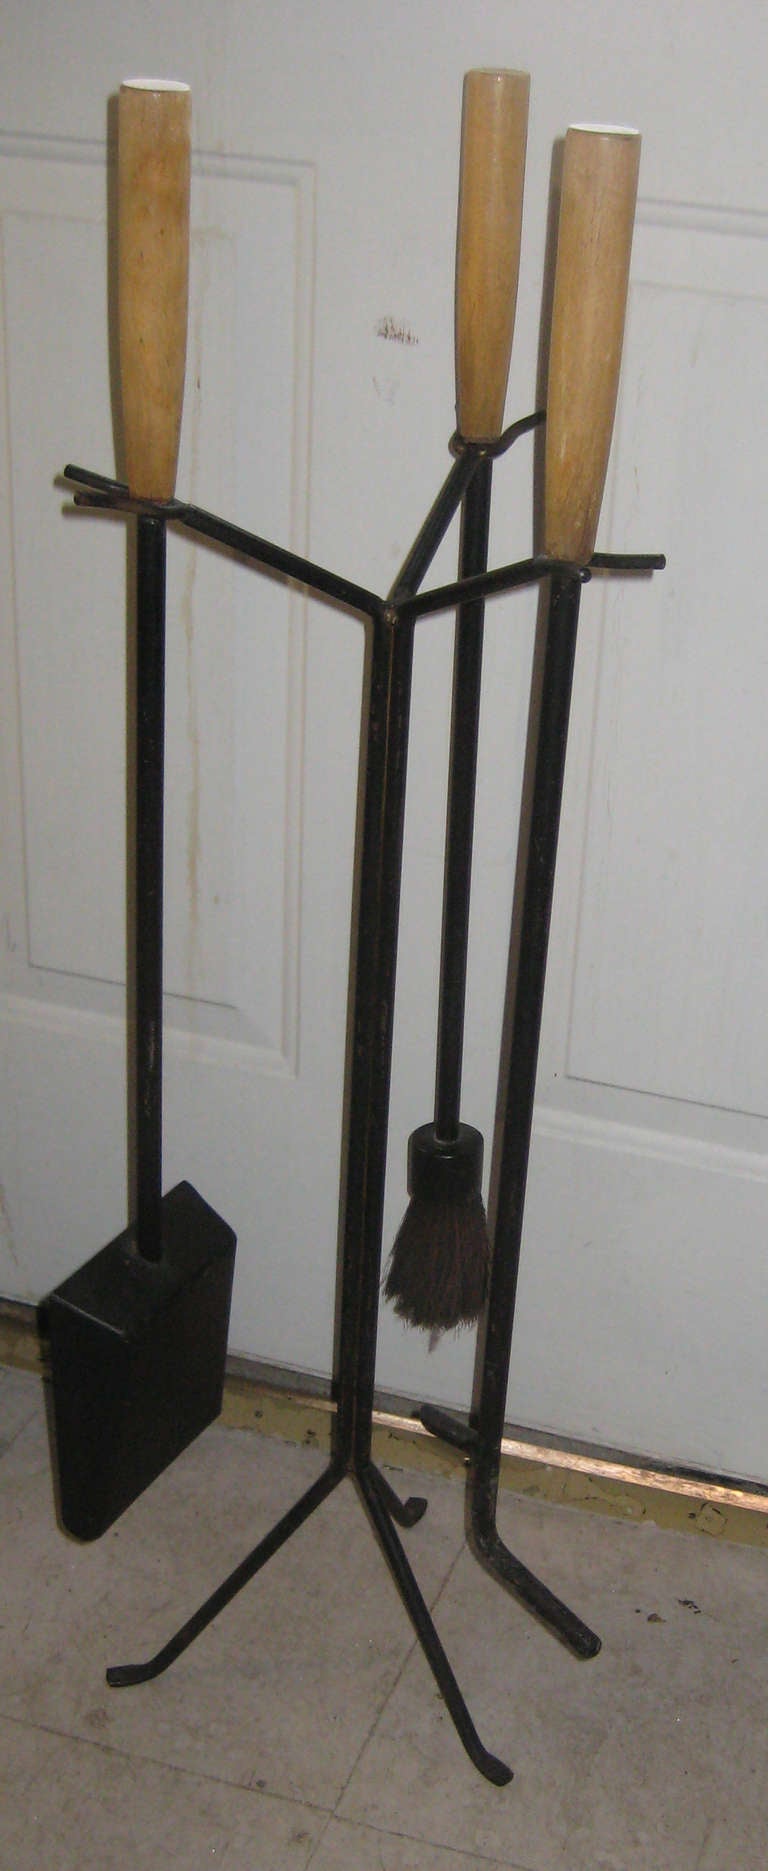 Rare and iconic painted iron and birch fireplace tool set designed by George Nelson for the Howard Miller Company. Includes stand, brush, shovel, and poker.